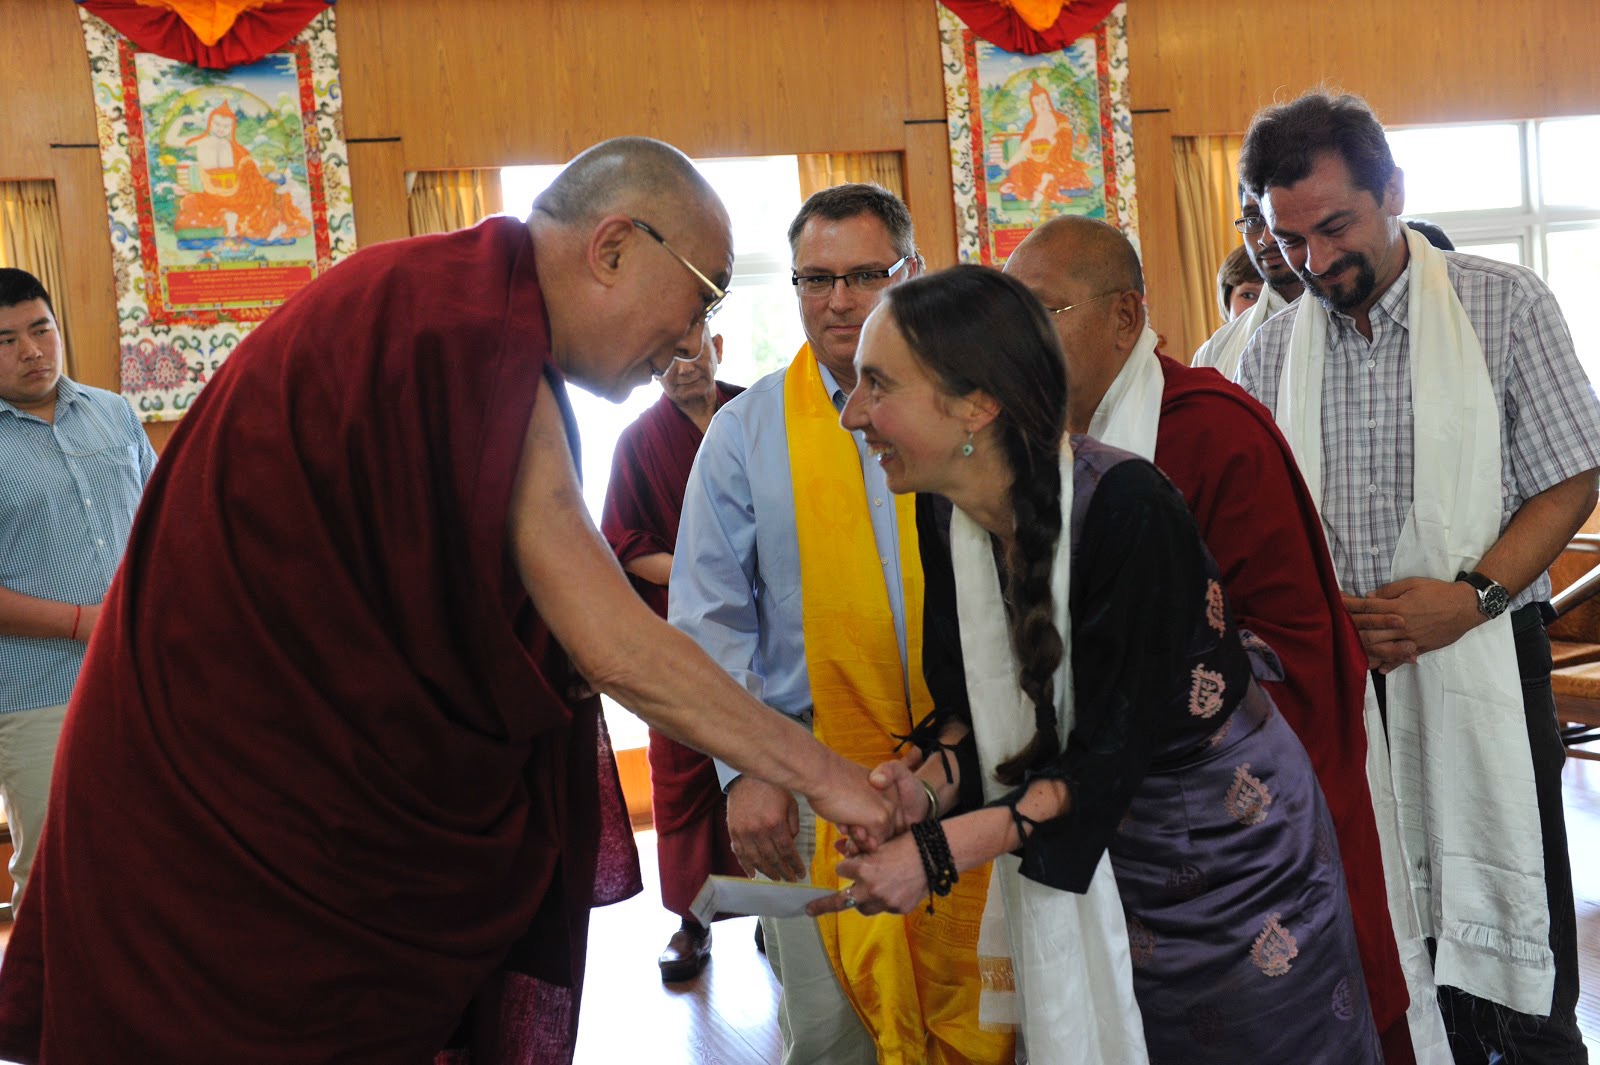 Meeting His Holiness